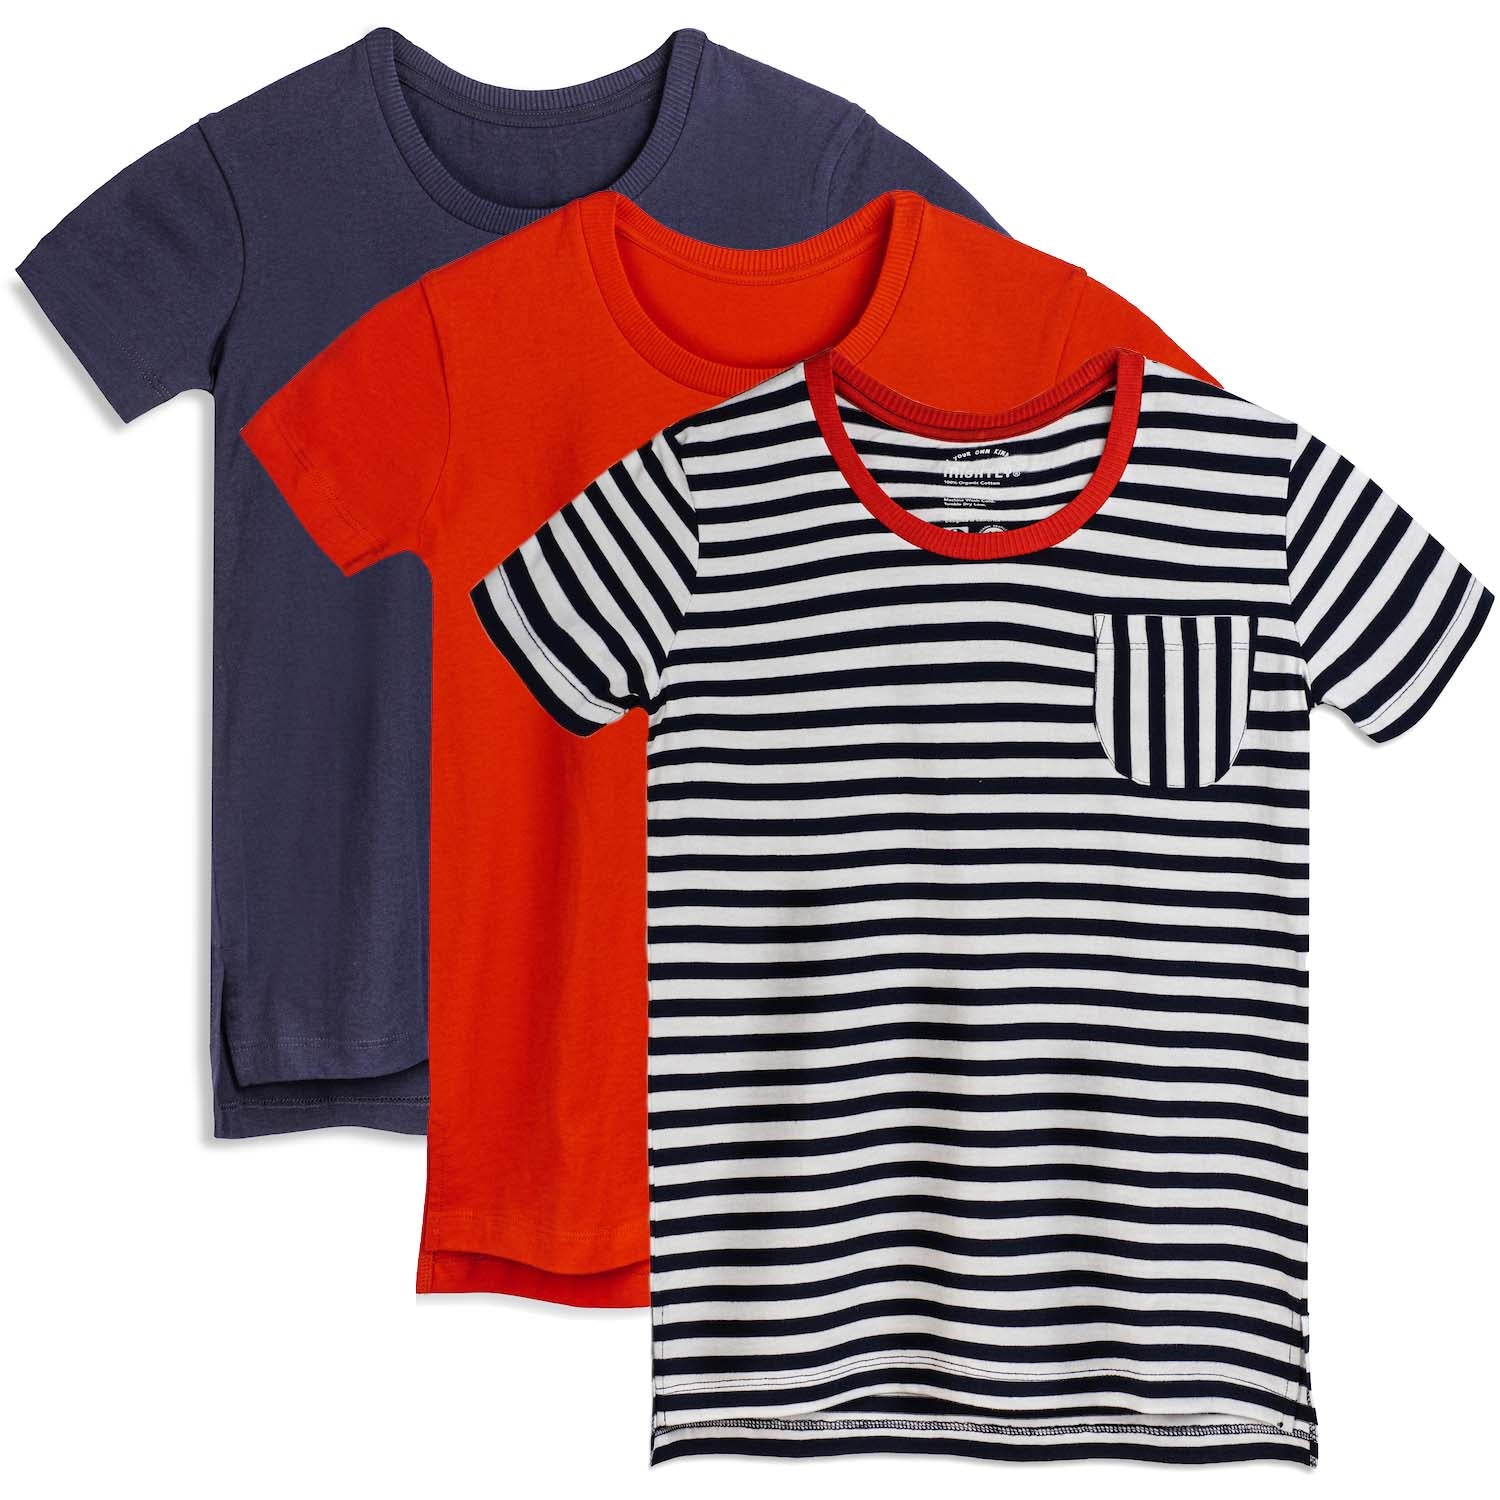 - Shirts Extended Mightly Length Cotton T-Shirts 3 Kids Pack Organic -